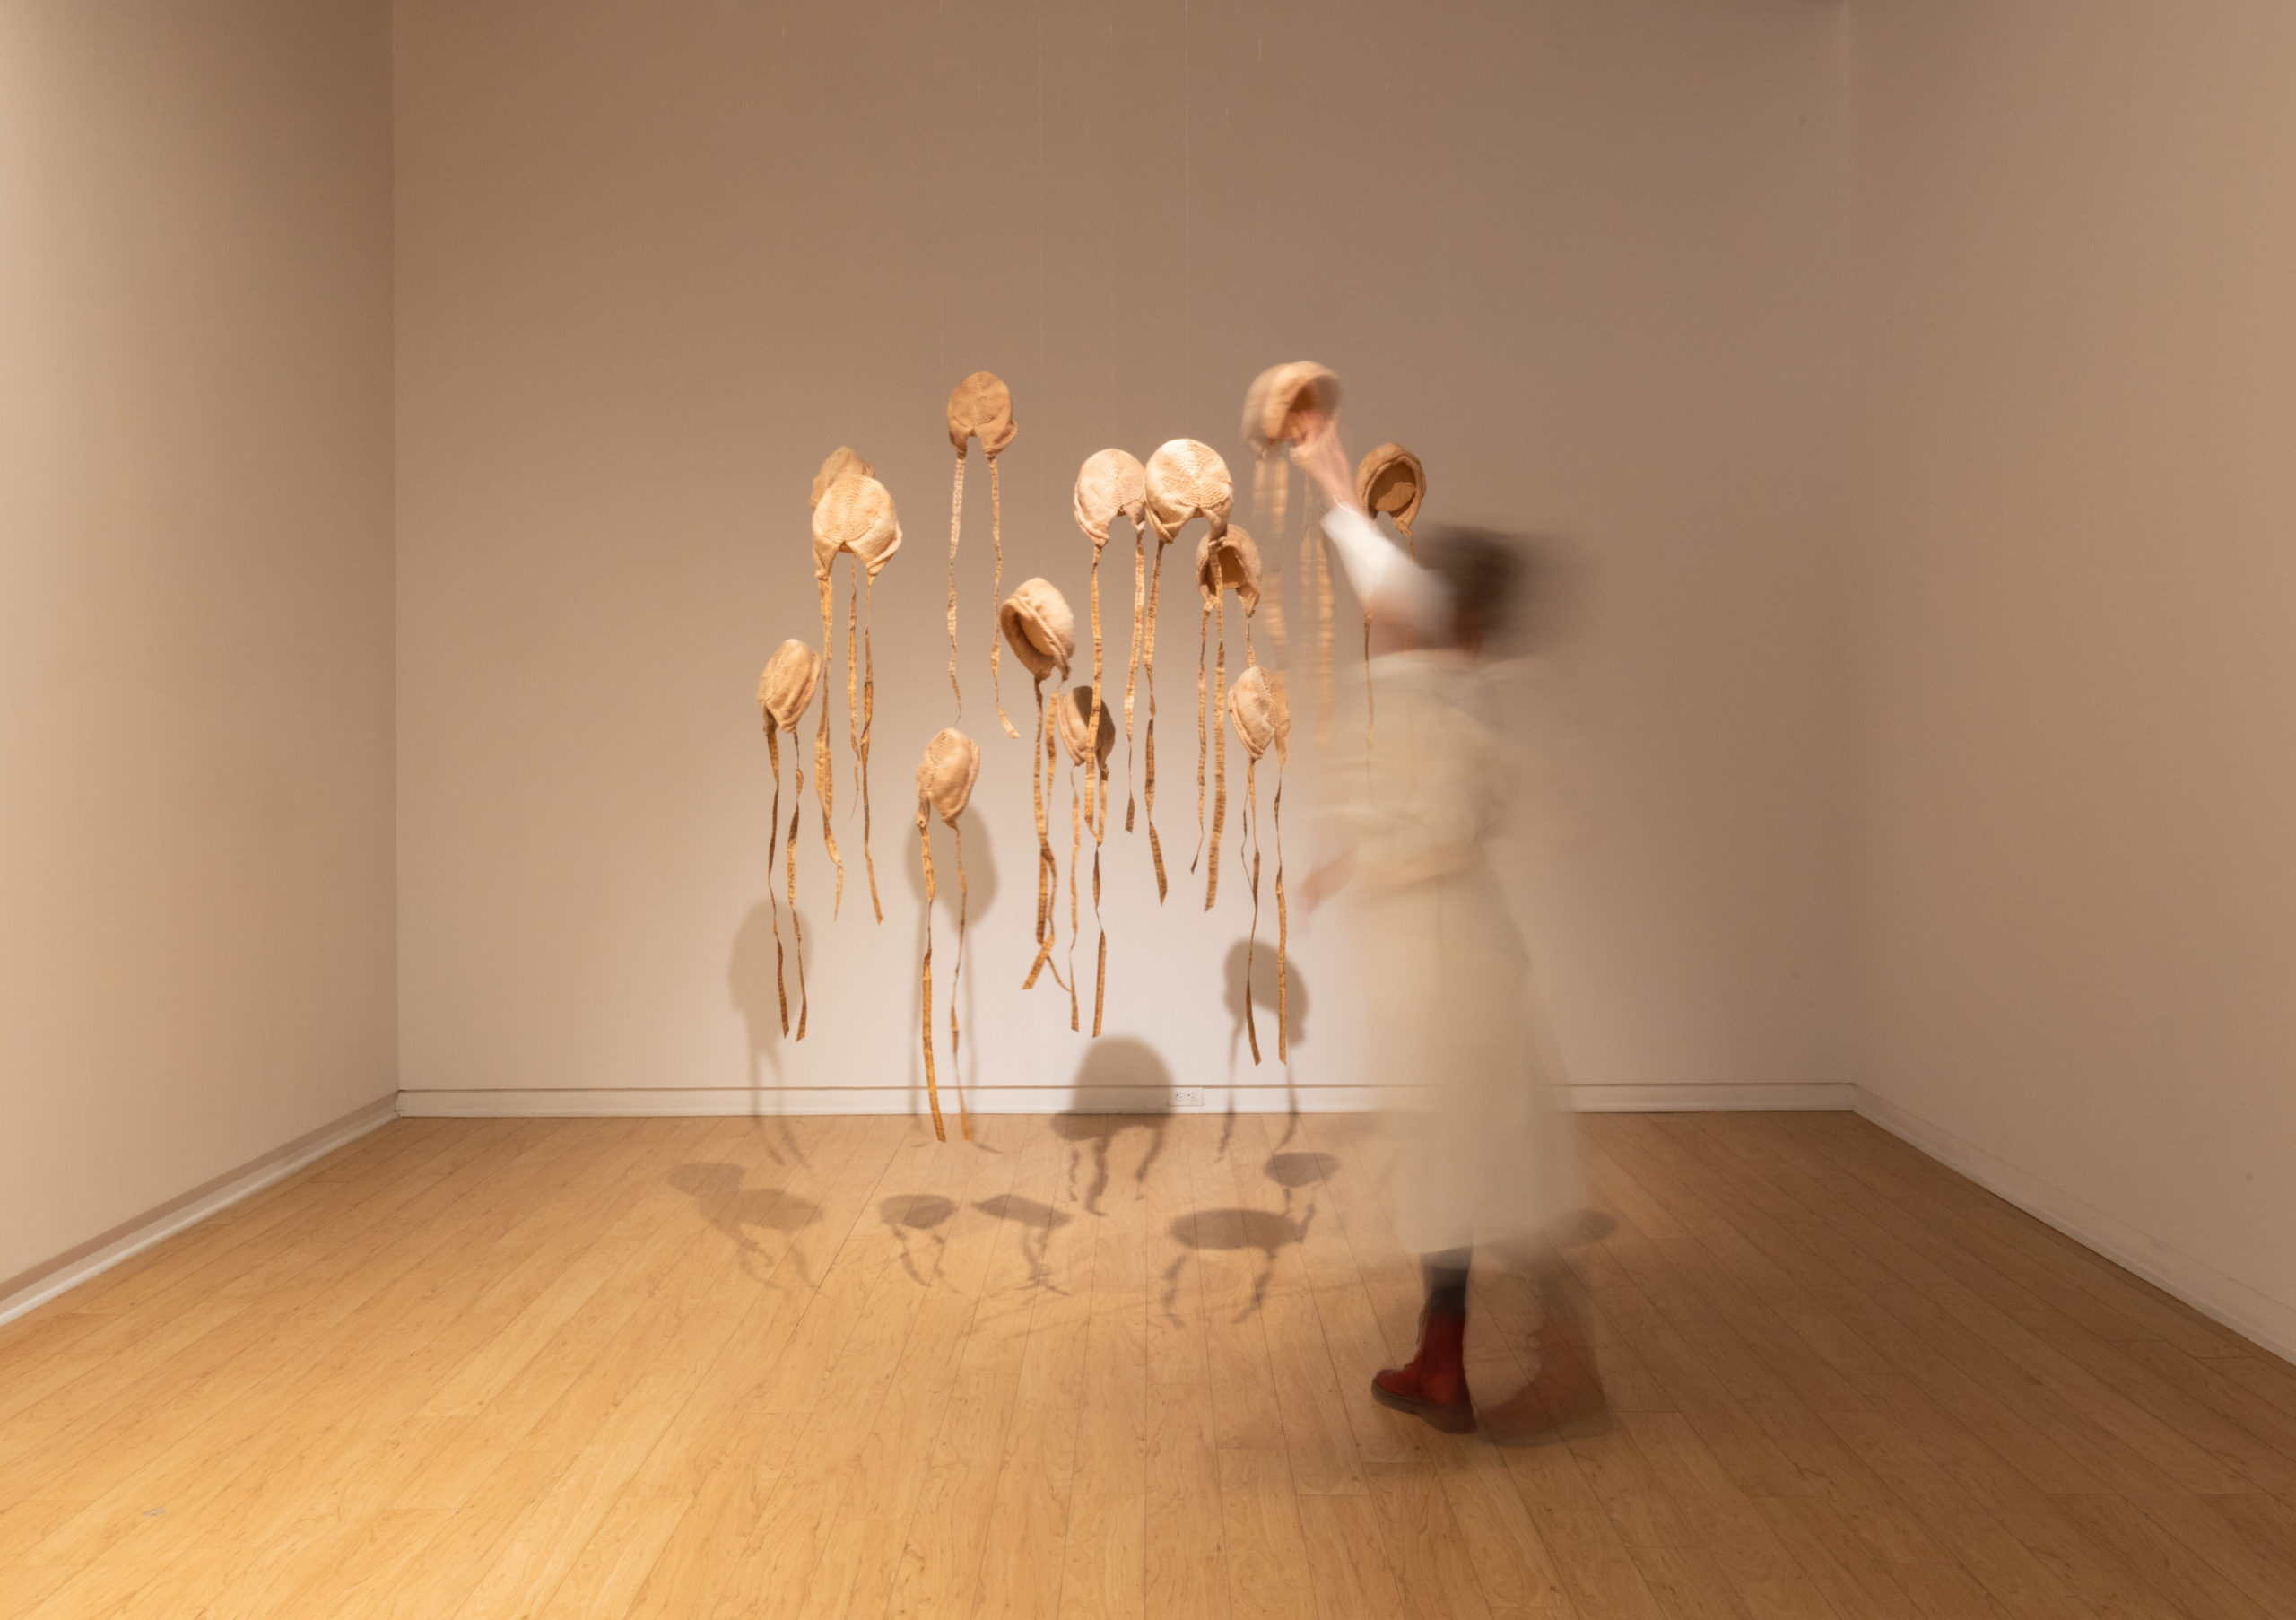 a person interacts with an art installation